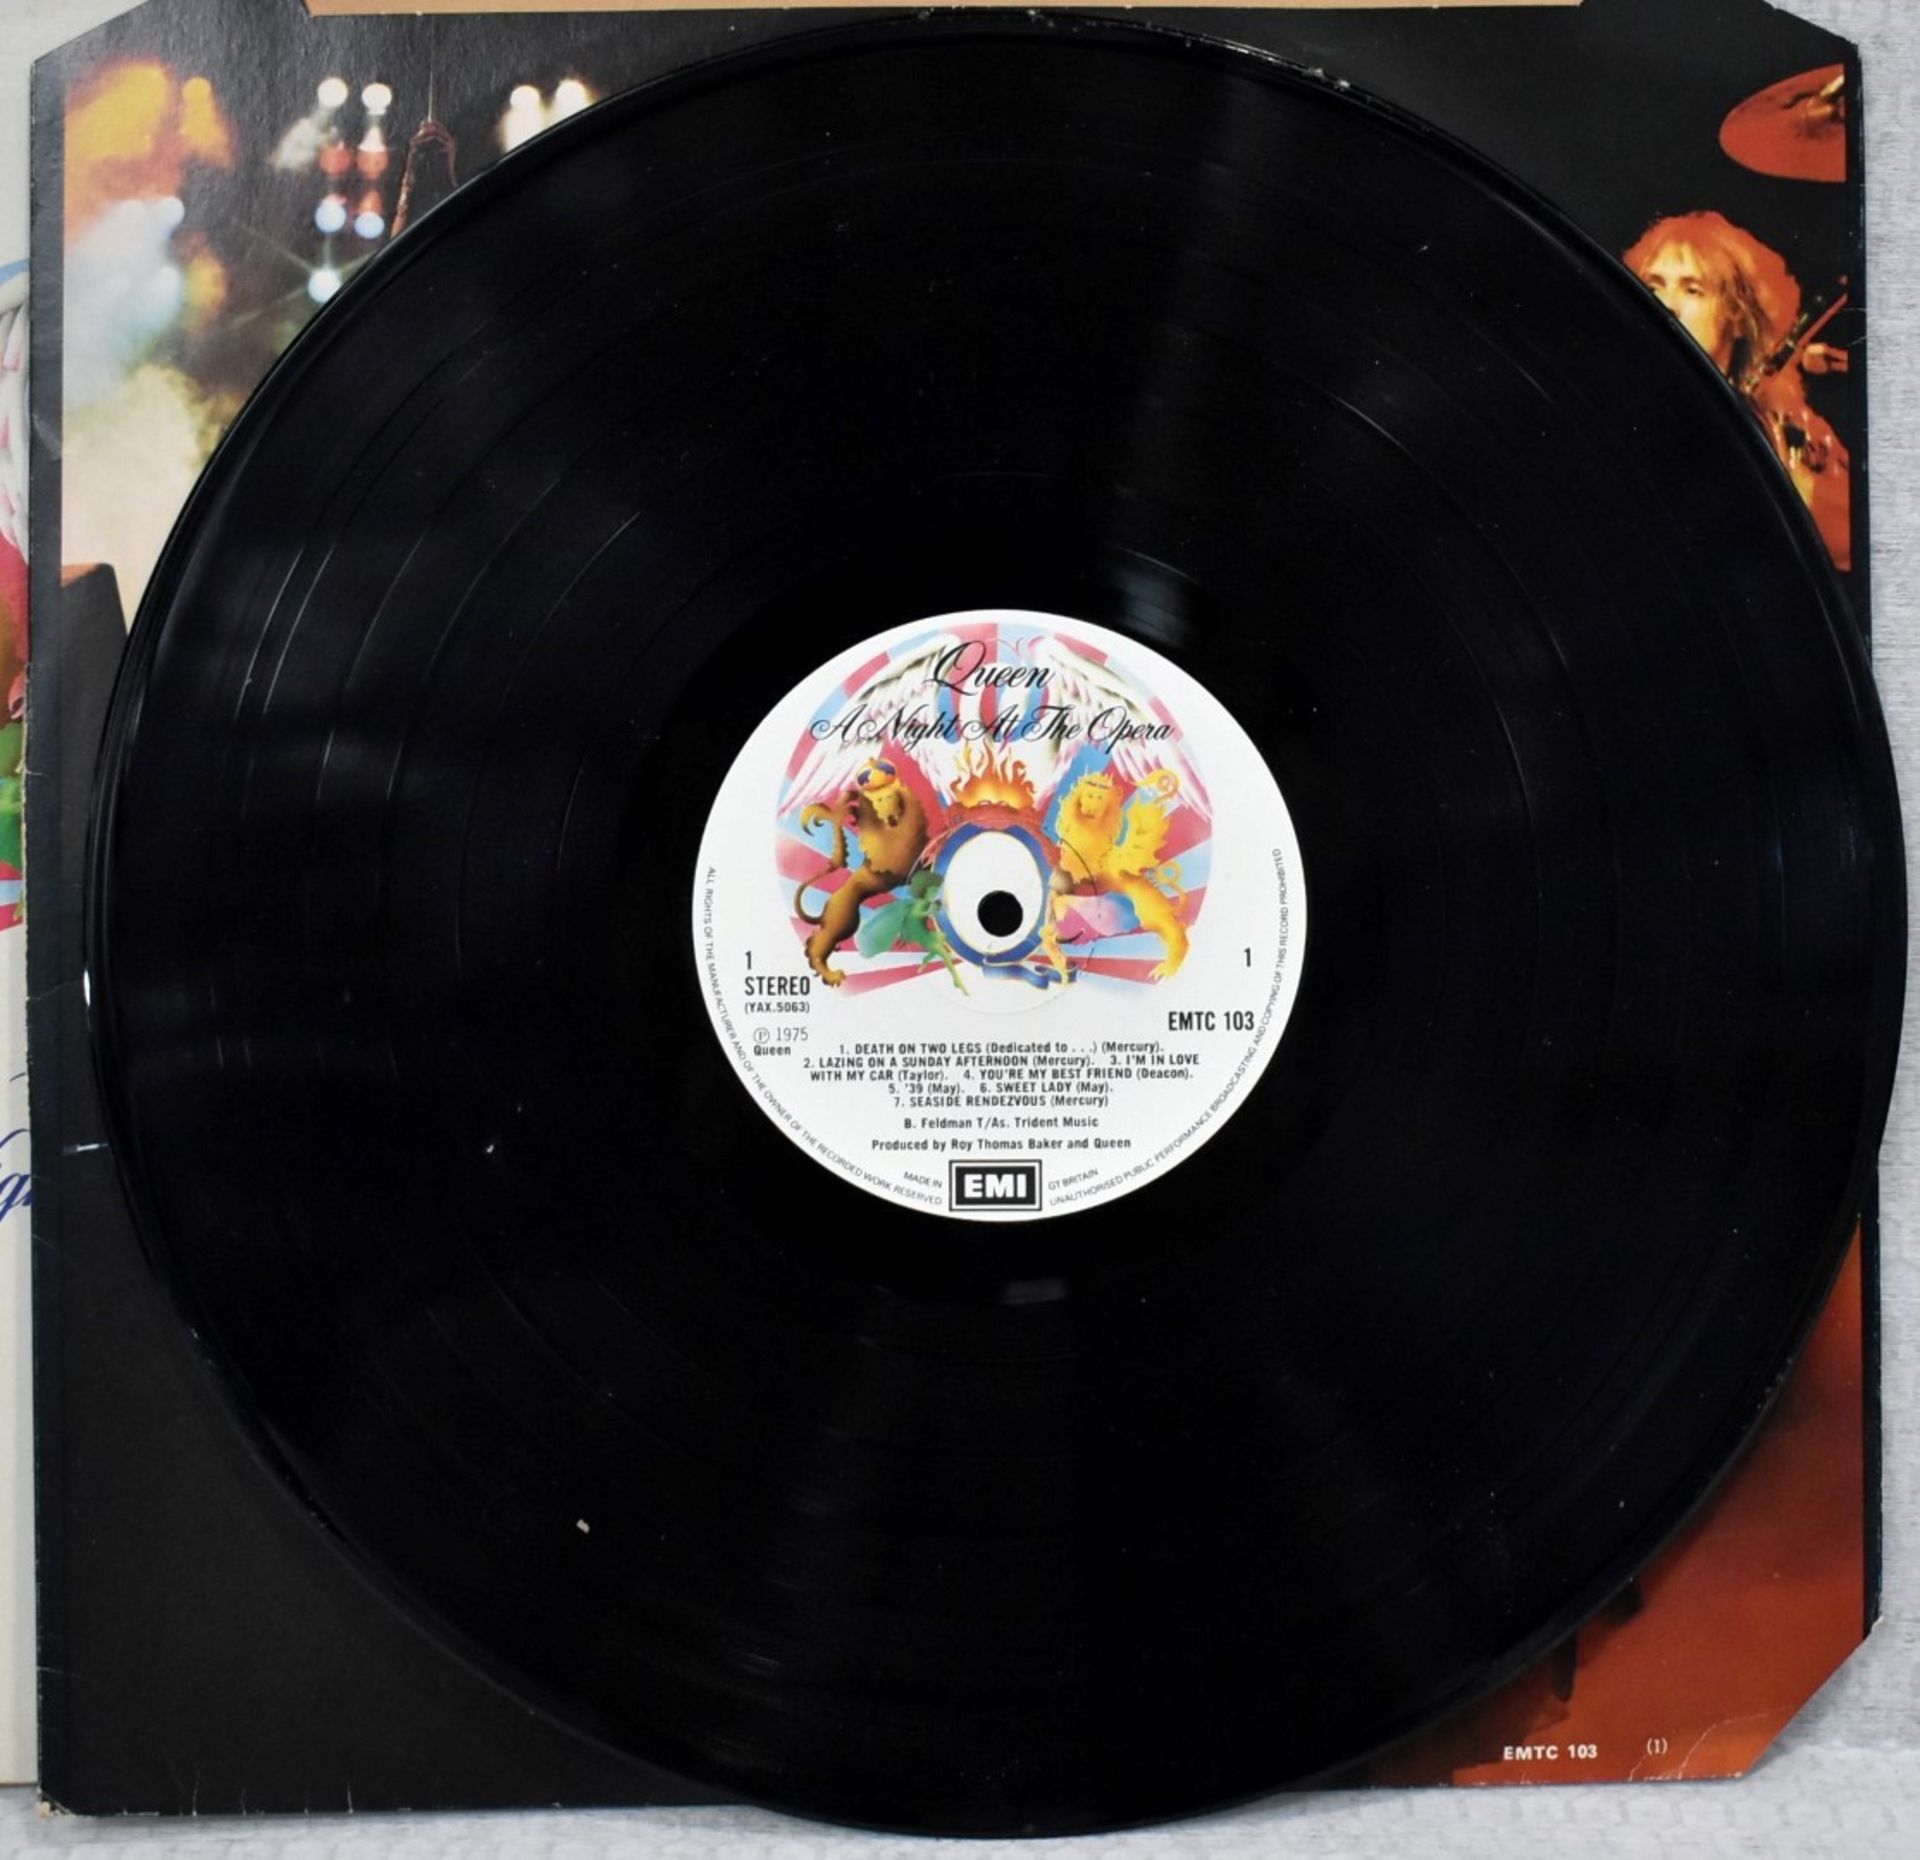 1 x QUEEN A Night At The Opera LP by EMI Records 1975 2 Sided 12 Inch Vinyl with Lyrics - Ref: - Image 16 of 21